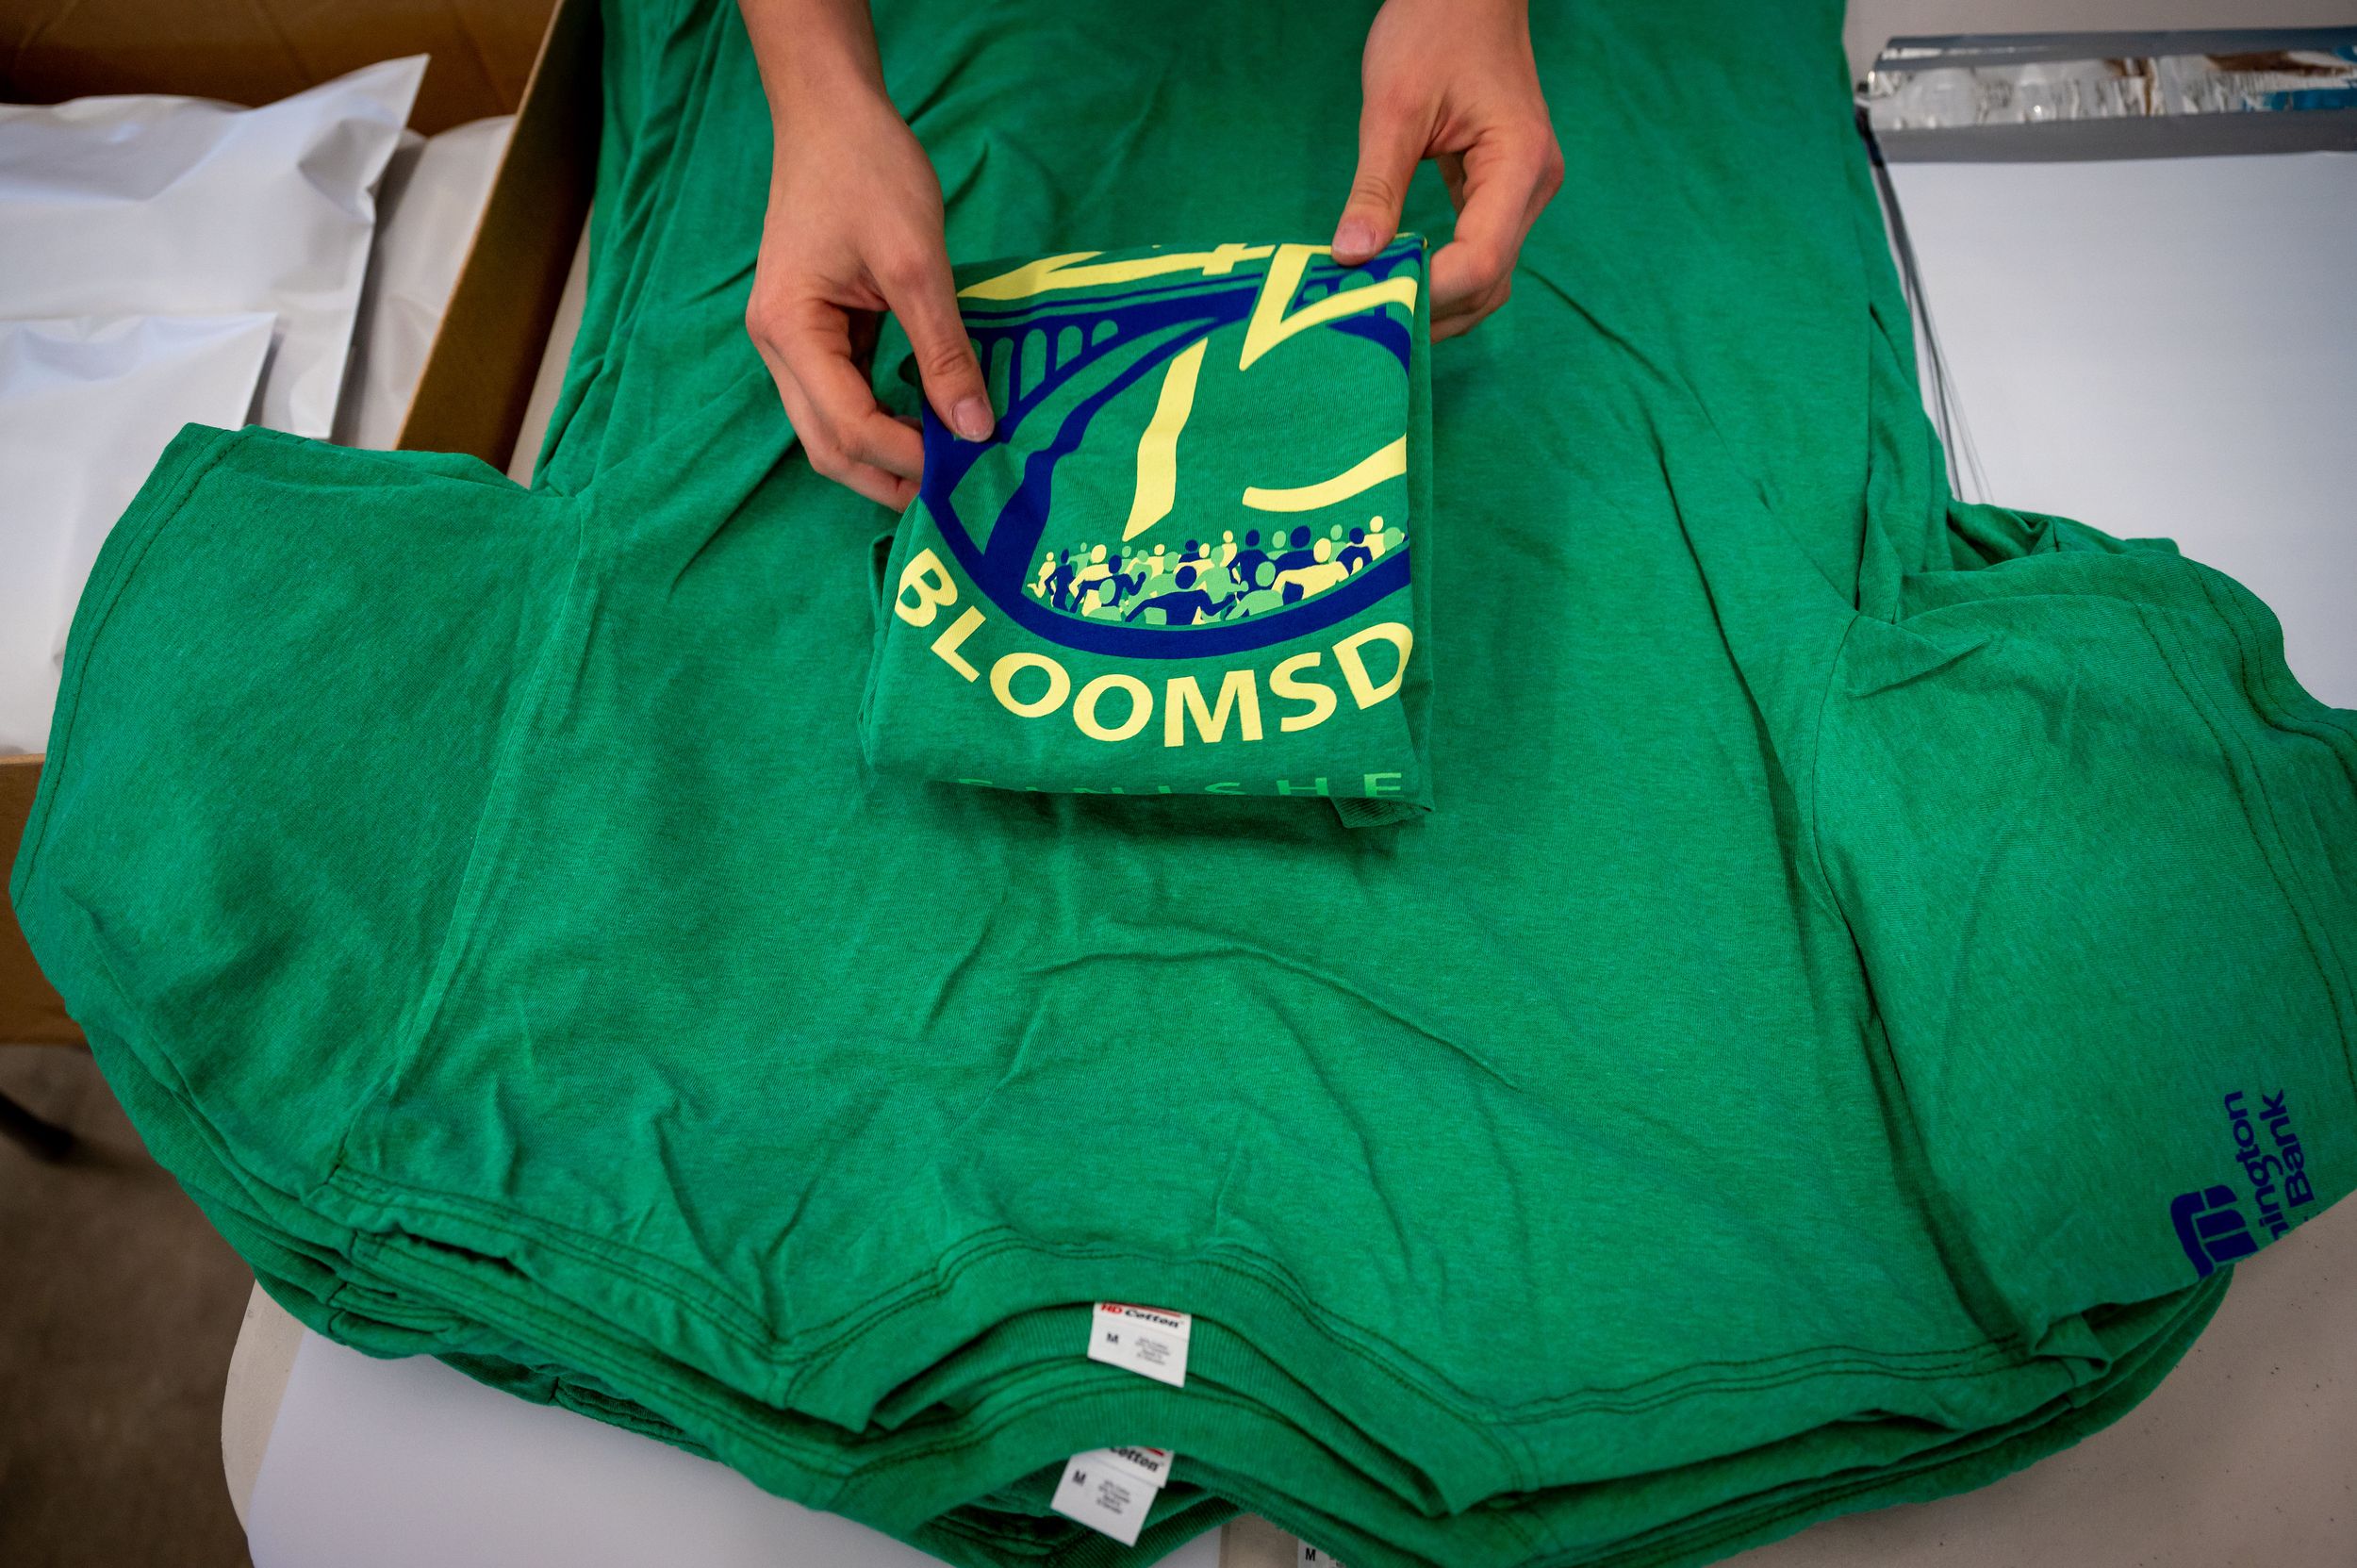 Bloomsday volunteers prep finisher Tshirts to mail across the world